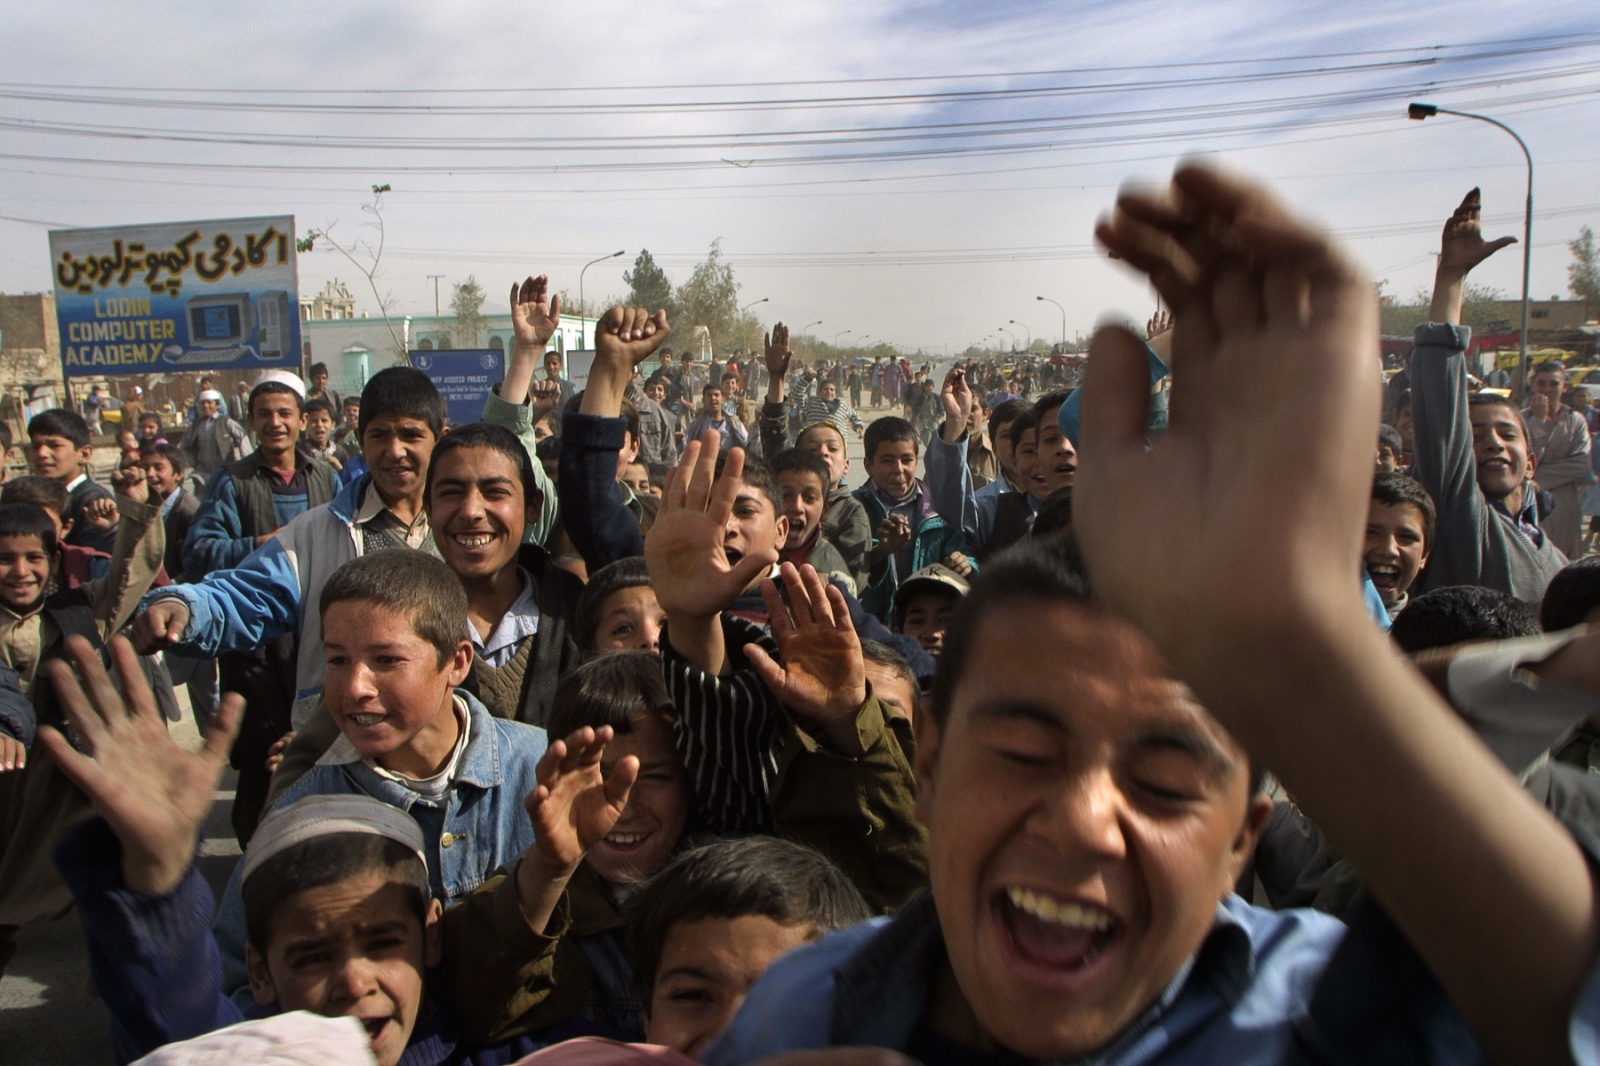 Onward to Kabul - As we arrive in Kabul, a crowd engulfs our car. At first...